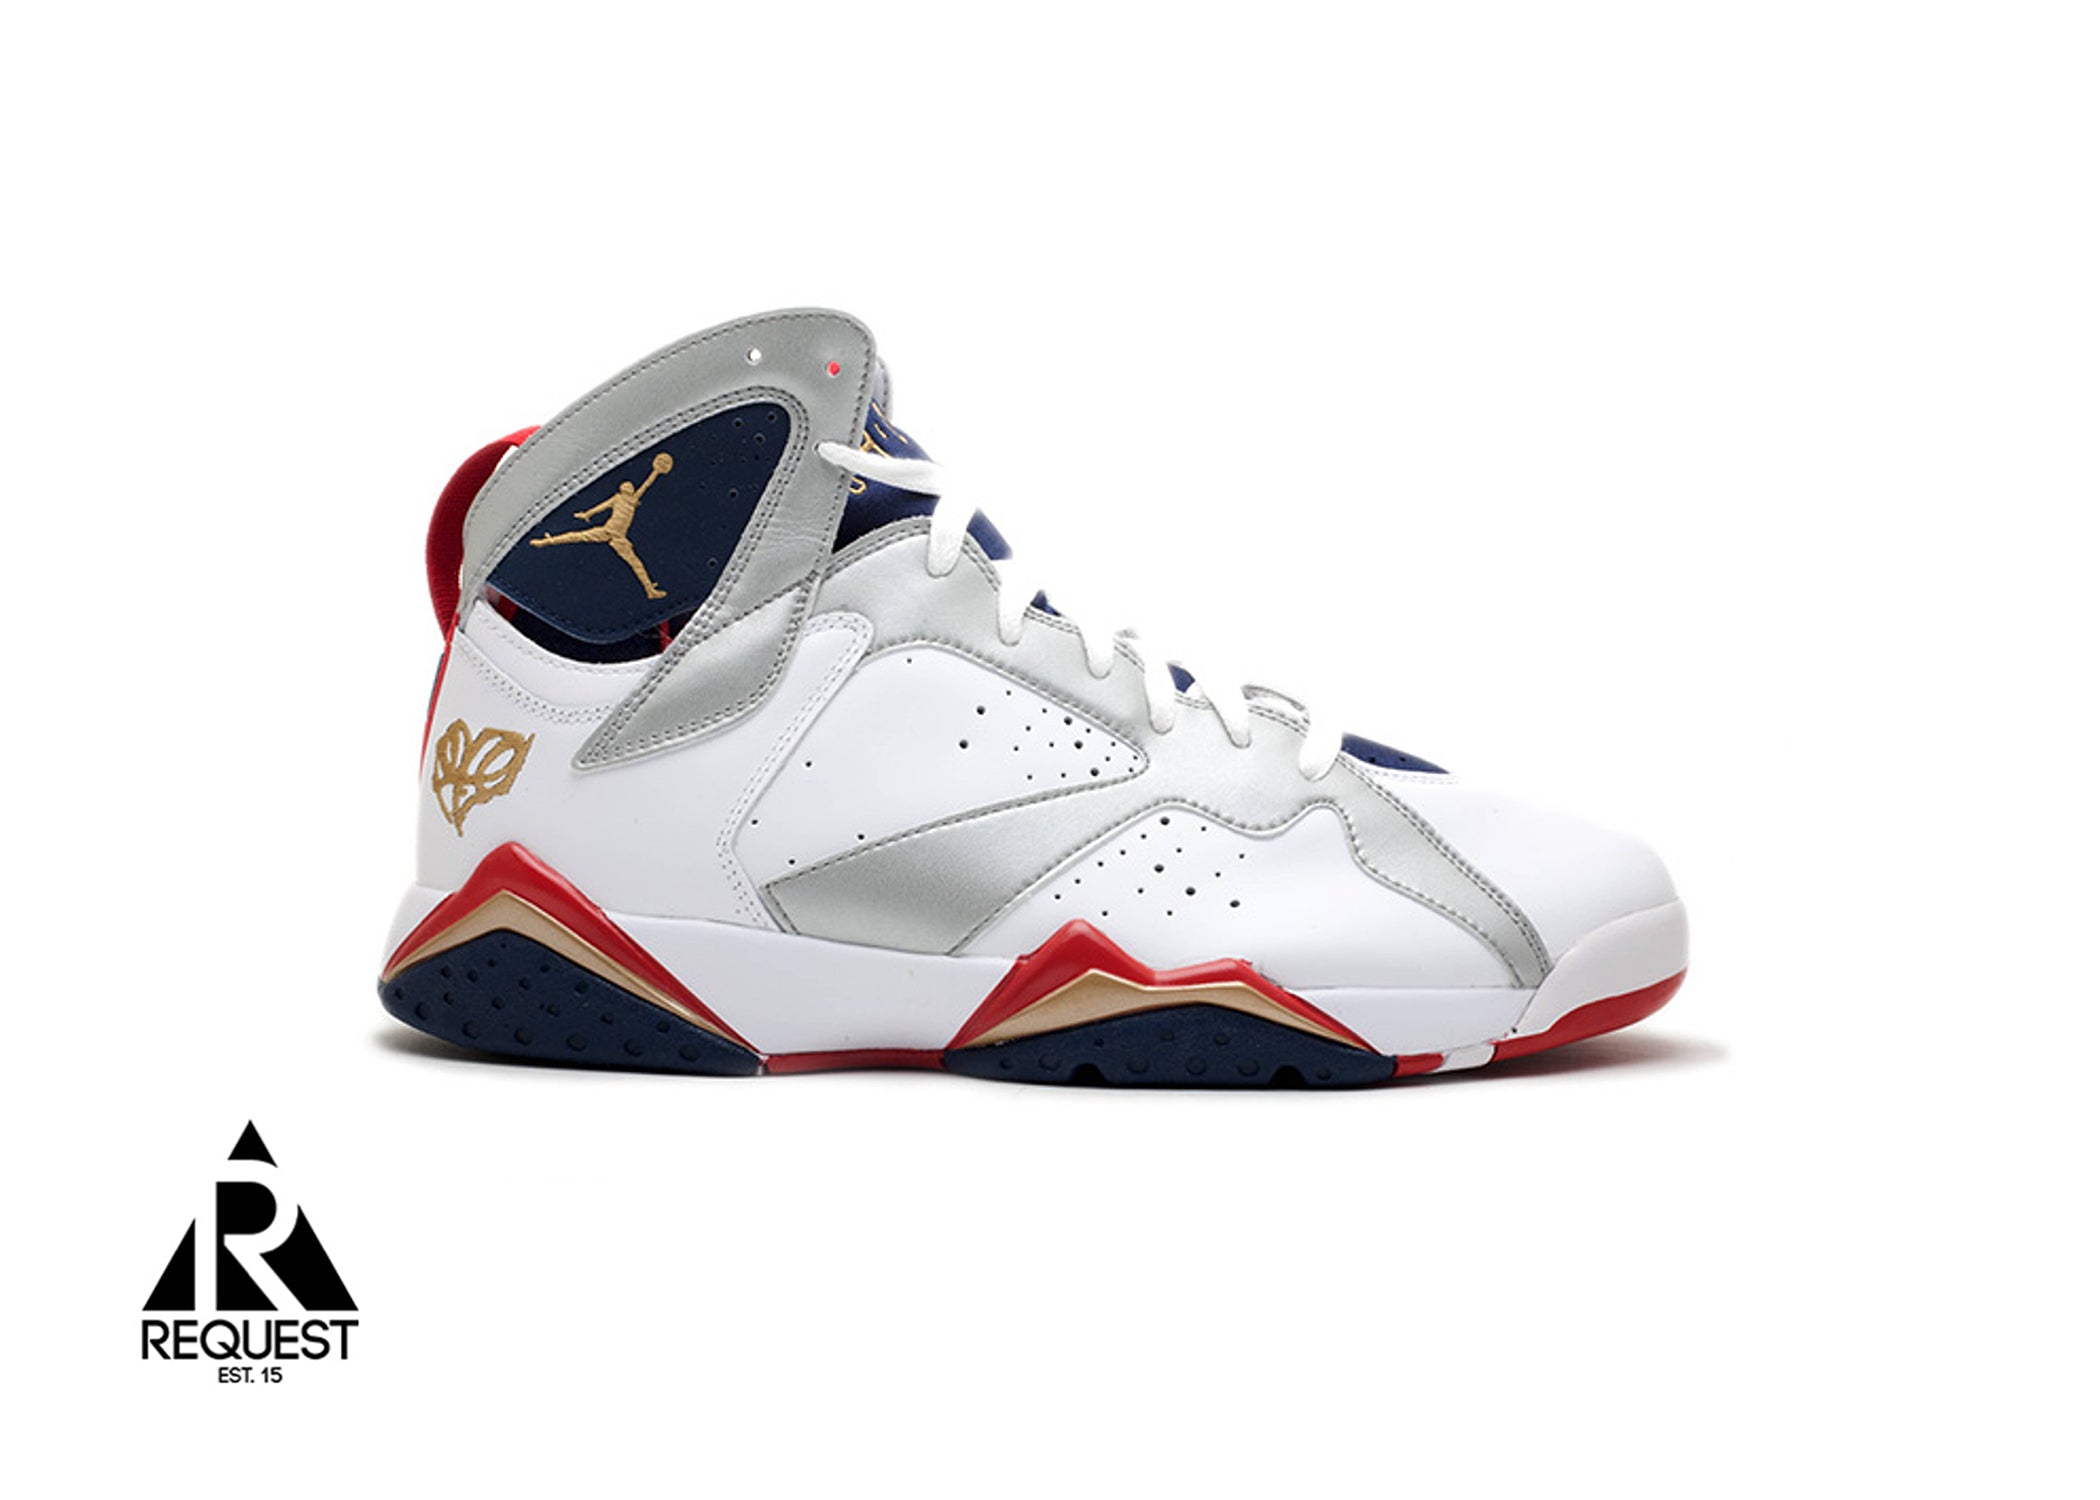 Air Jordan 7 Retro “For The Love Of The Game”